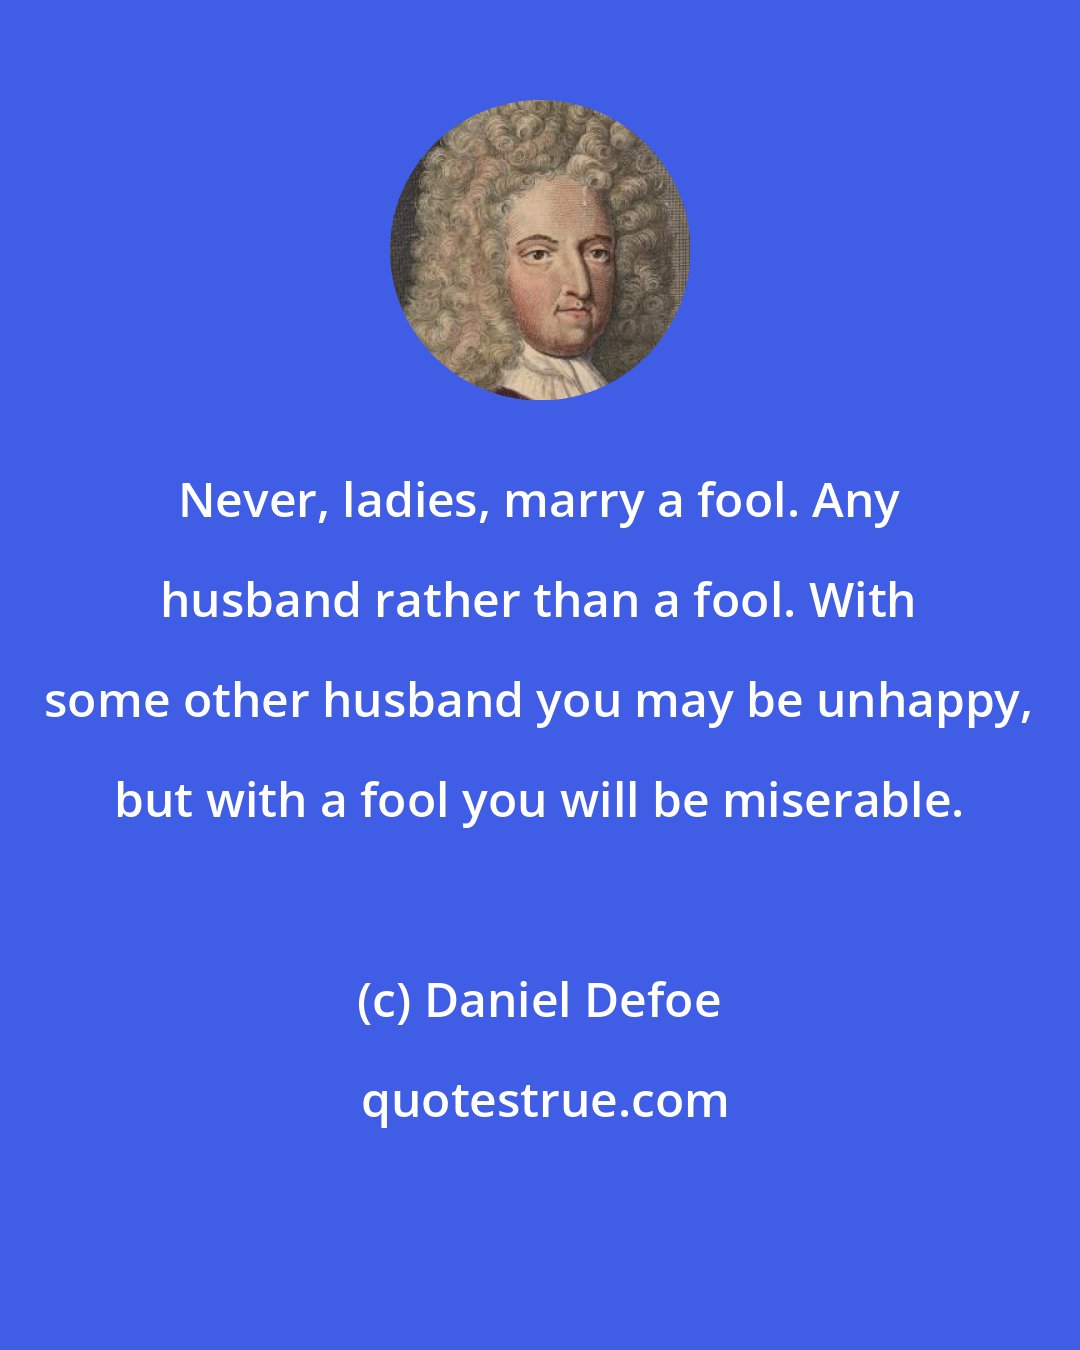 Daniel Defoe: Never, ladies, marry a fool. Any husband rather than a fool. With some other husband you may be unhappy, but with a fool you will be miserable.